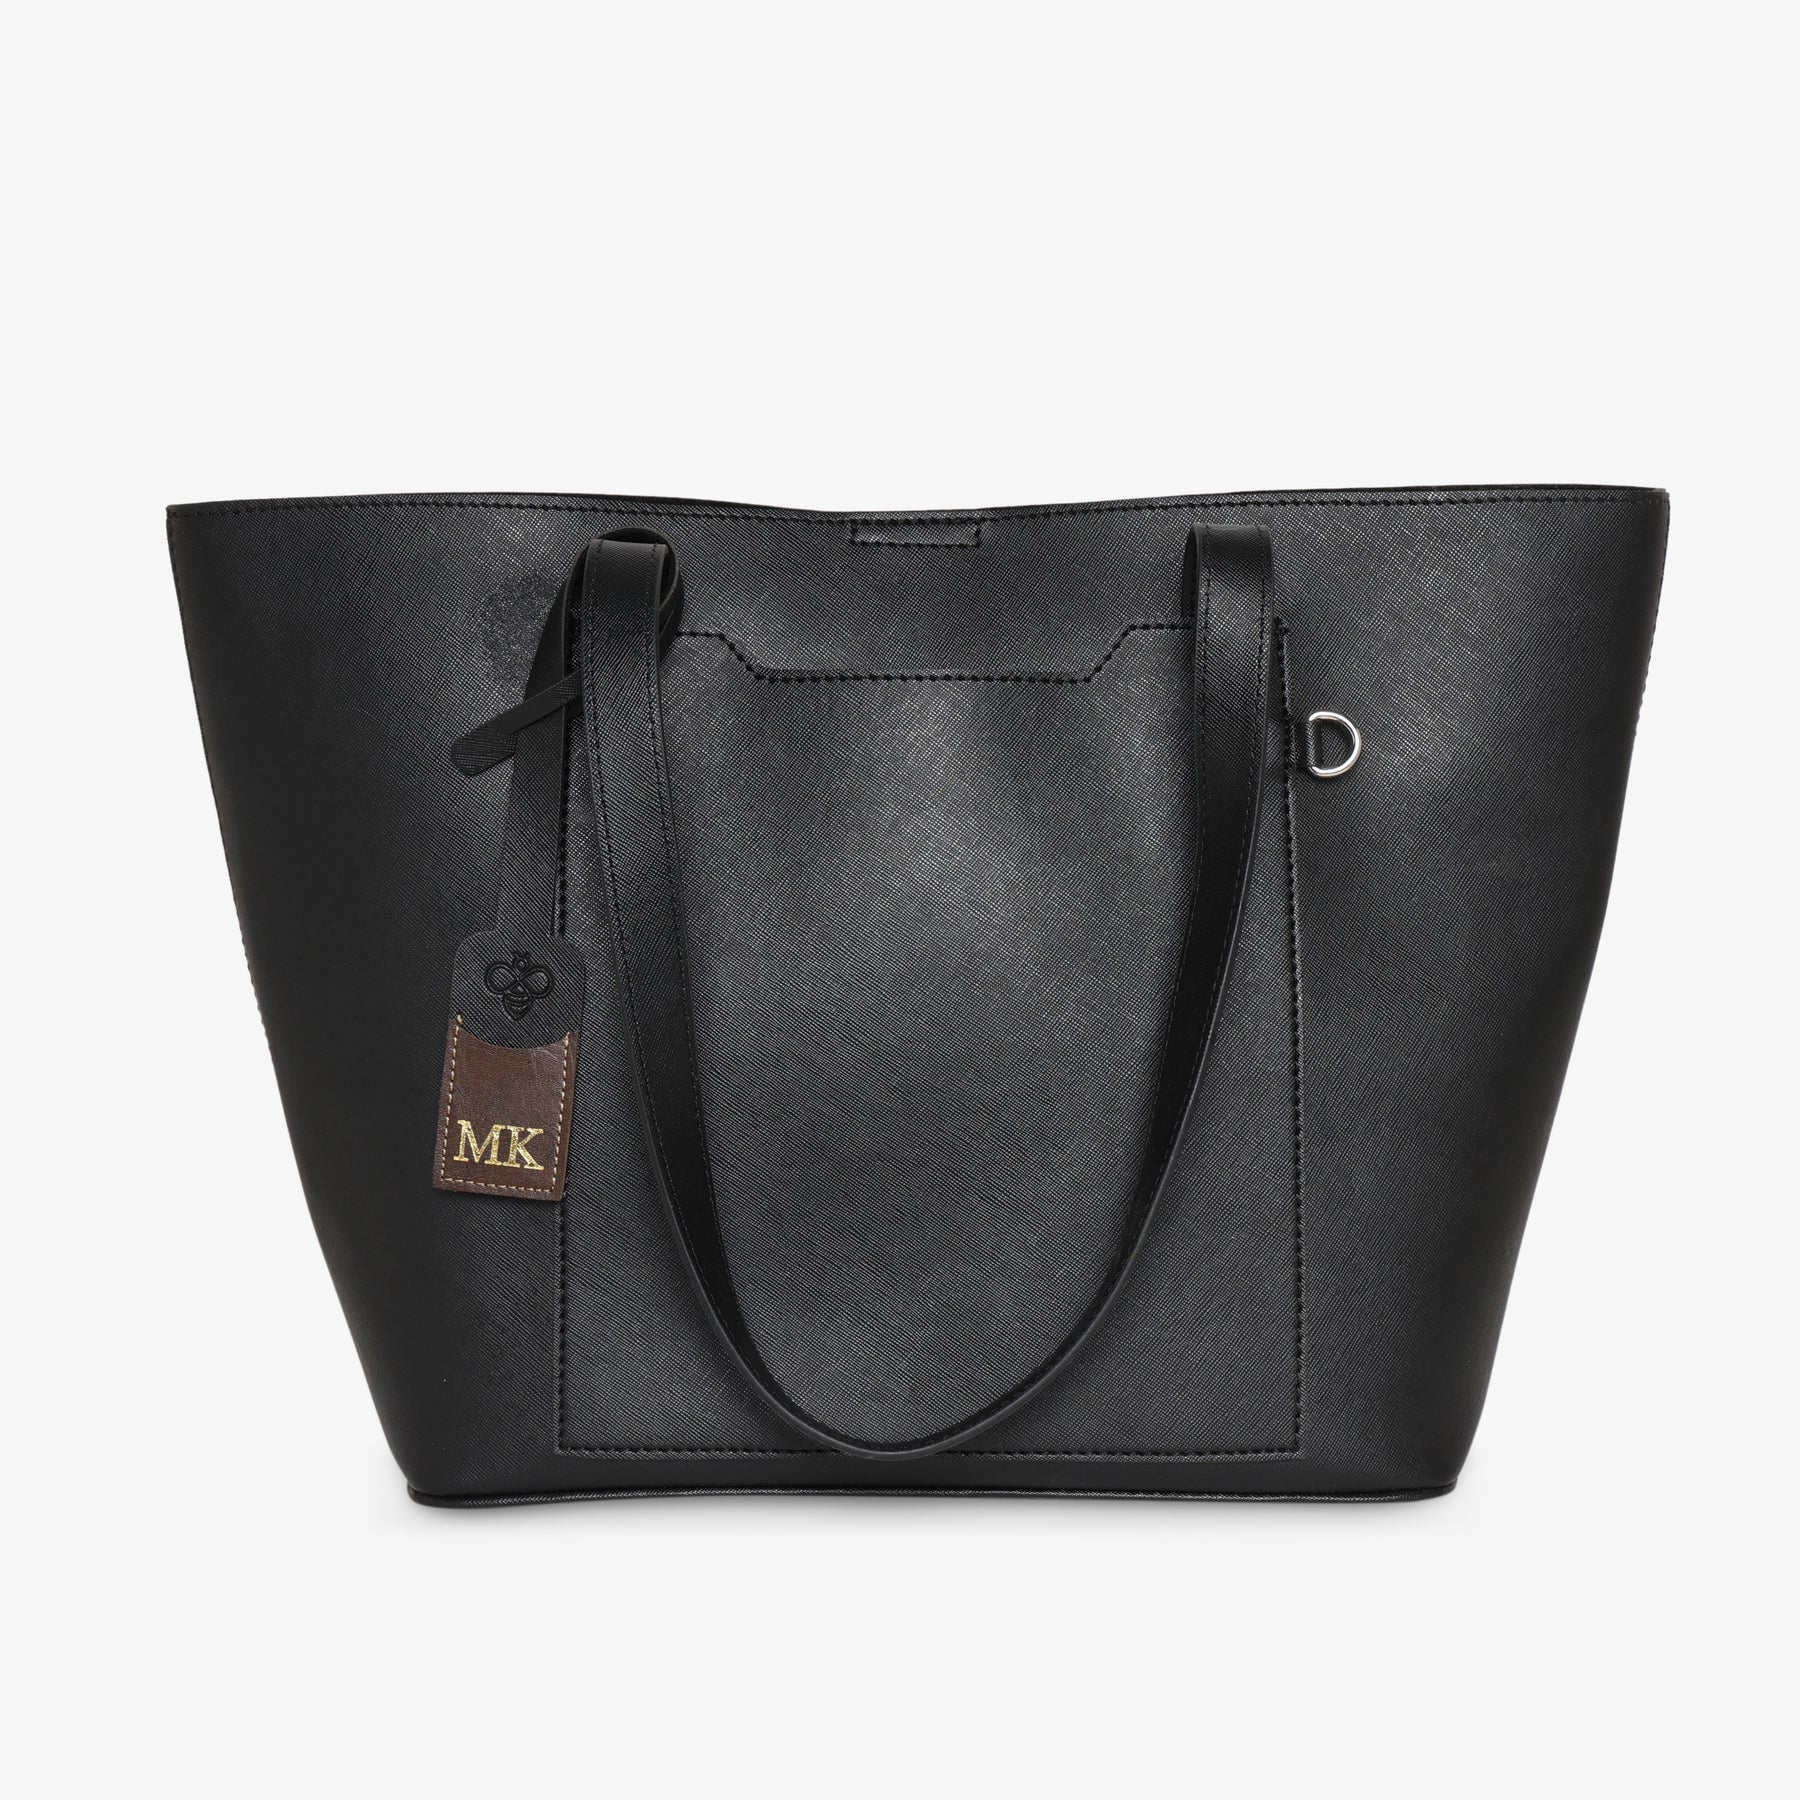 Top more than 82 black tote bags - in.cdgdbentre